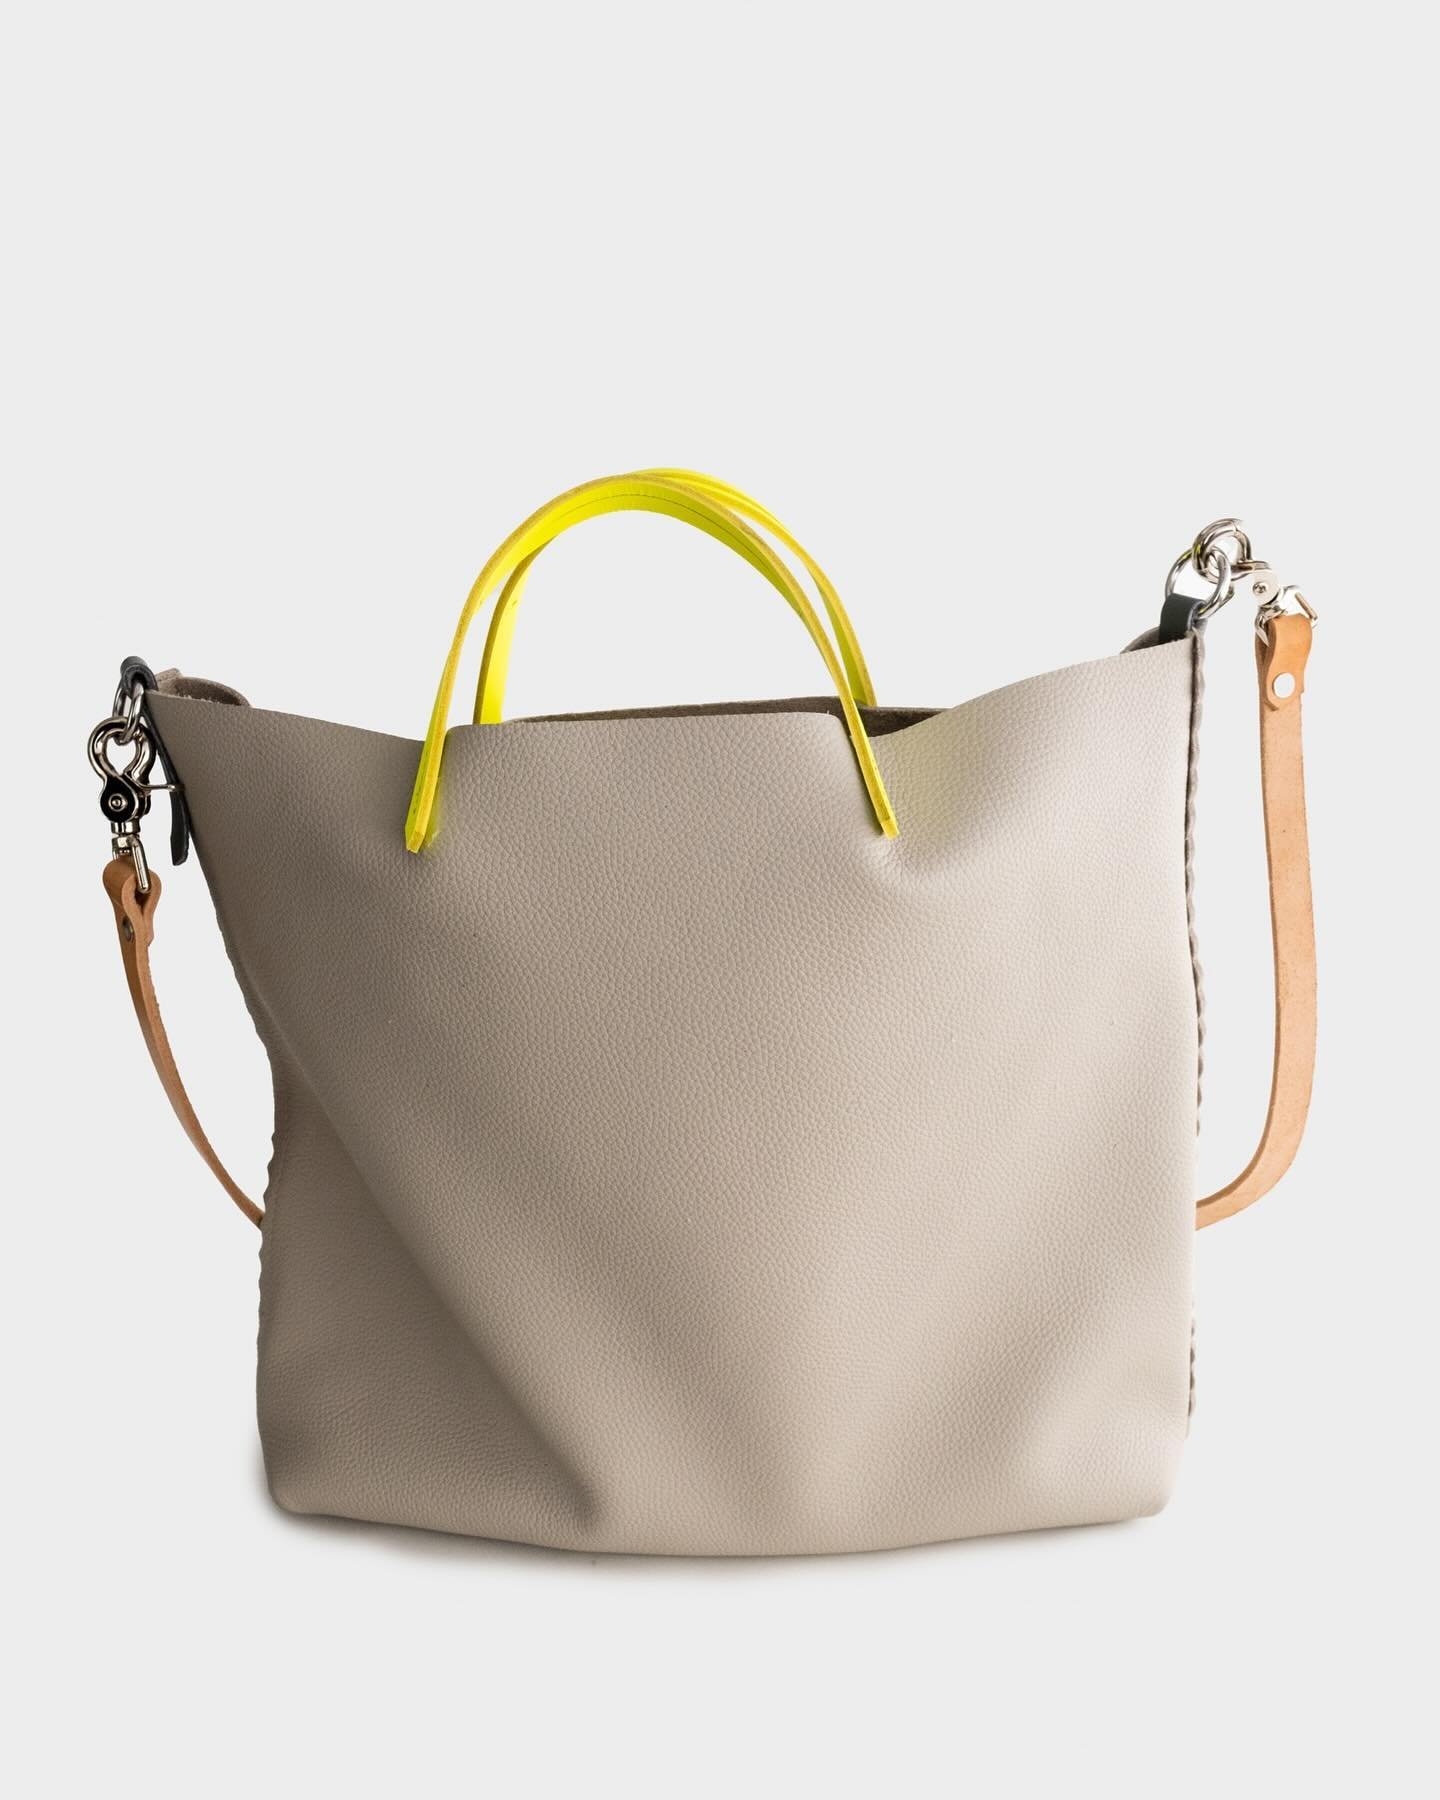 Not too light, not too dark- 
Light grey is the Goldilocks of hues. 
Limited edition, Italian milled Louche Tote in dove grey with neon leather handles is available on the website ⬆️
.
Booking Spring Trunk shows now! DM to enquire 💥
.
.
#trunkshows 